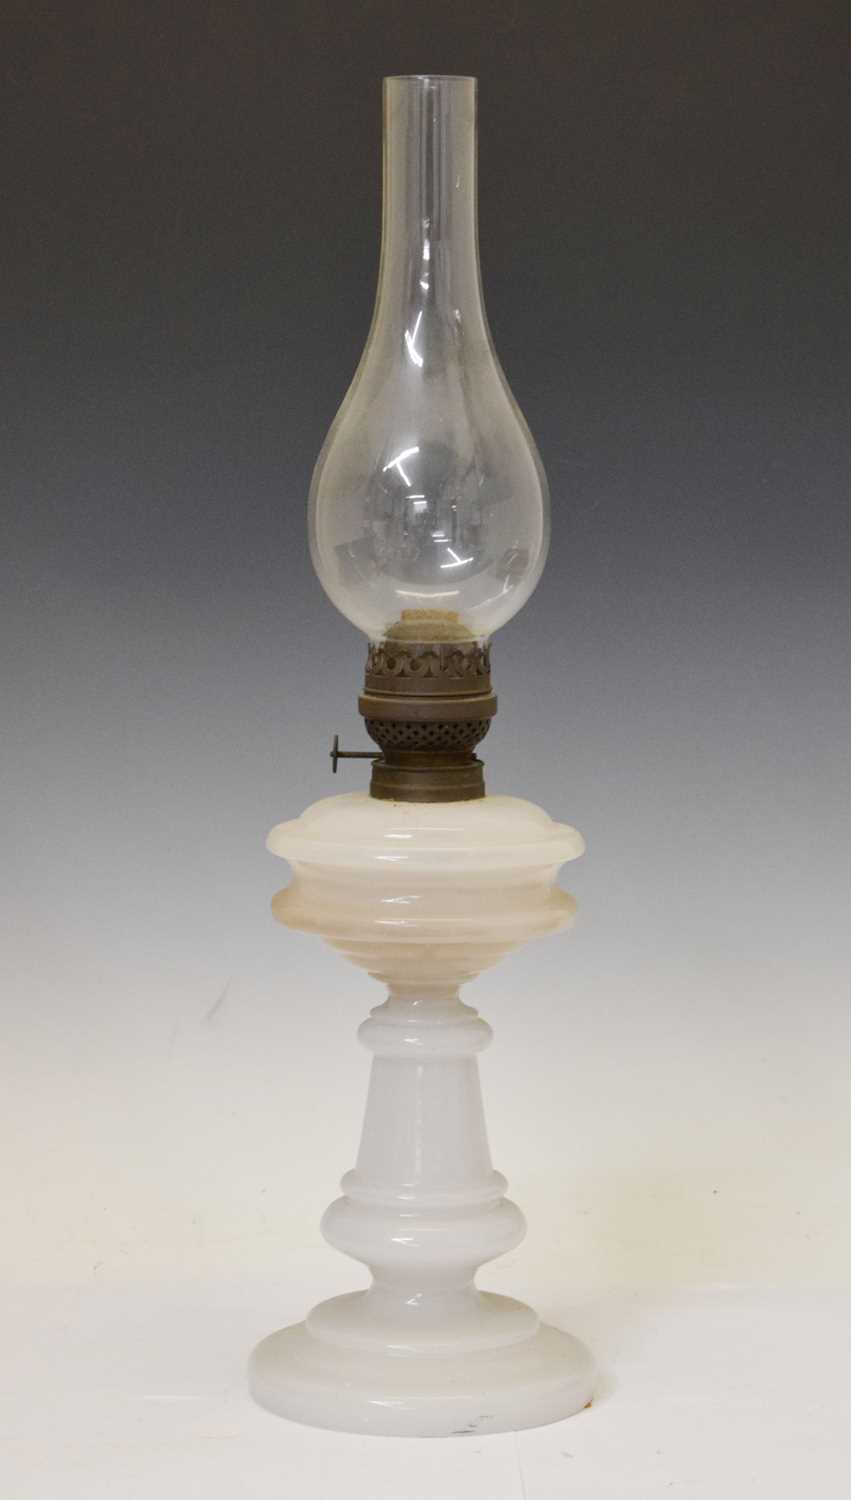 Late 19th/early 20th century opaque glass oil lamp